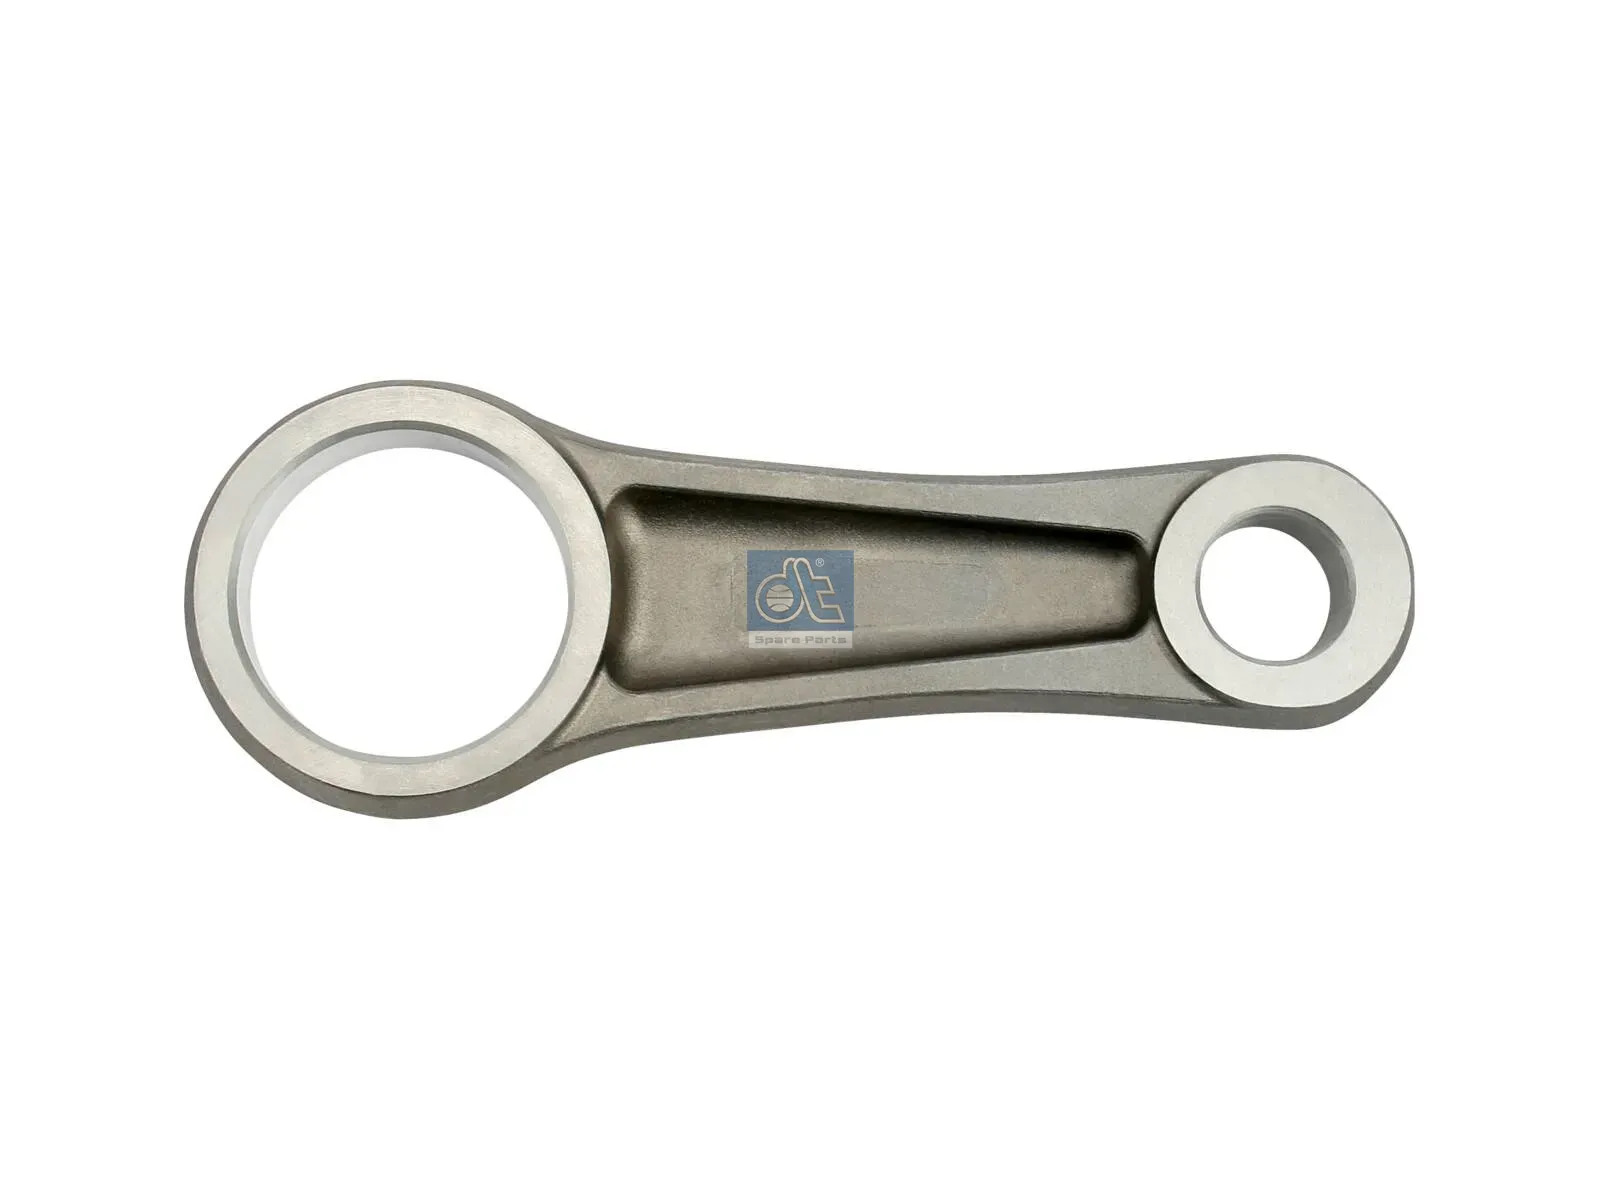 Connecting rod, compressor